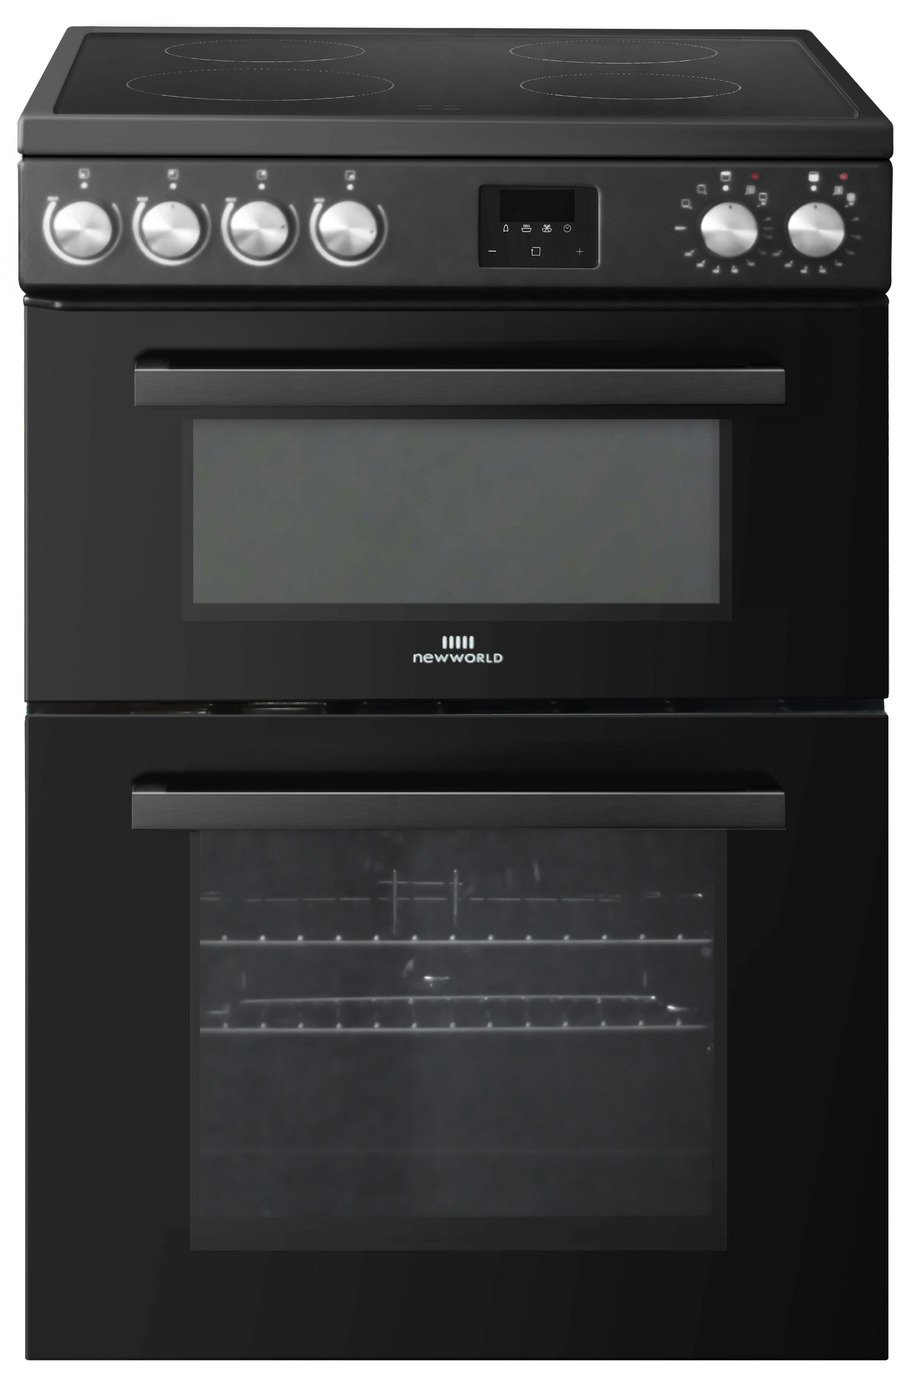 New World NWLS60DEB 60cm Double Oven Electric Cooker - Black